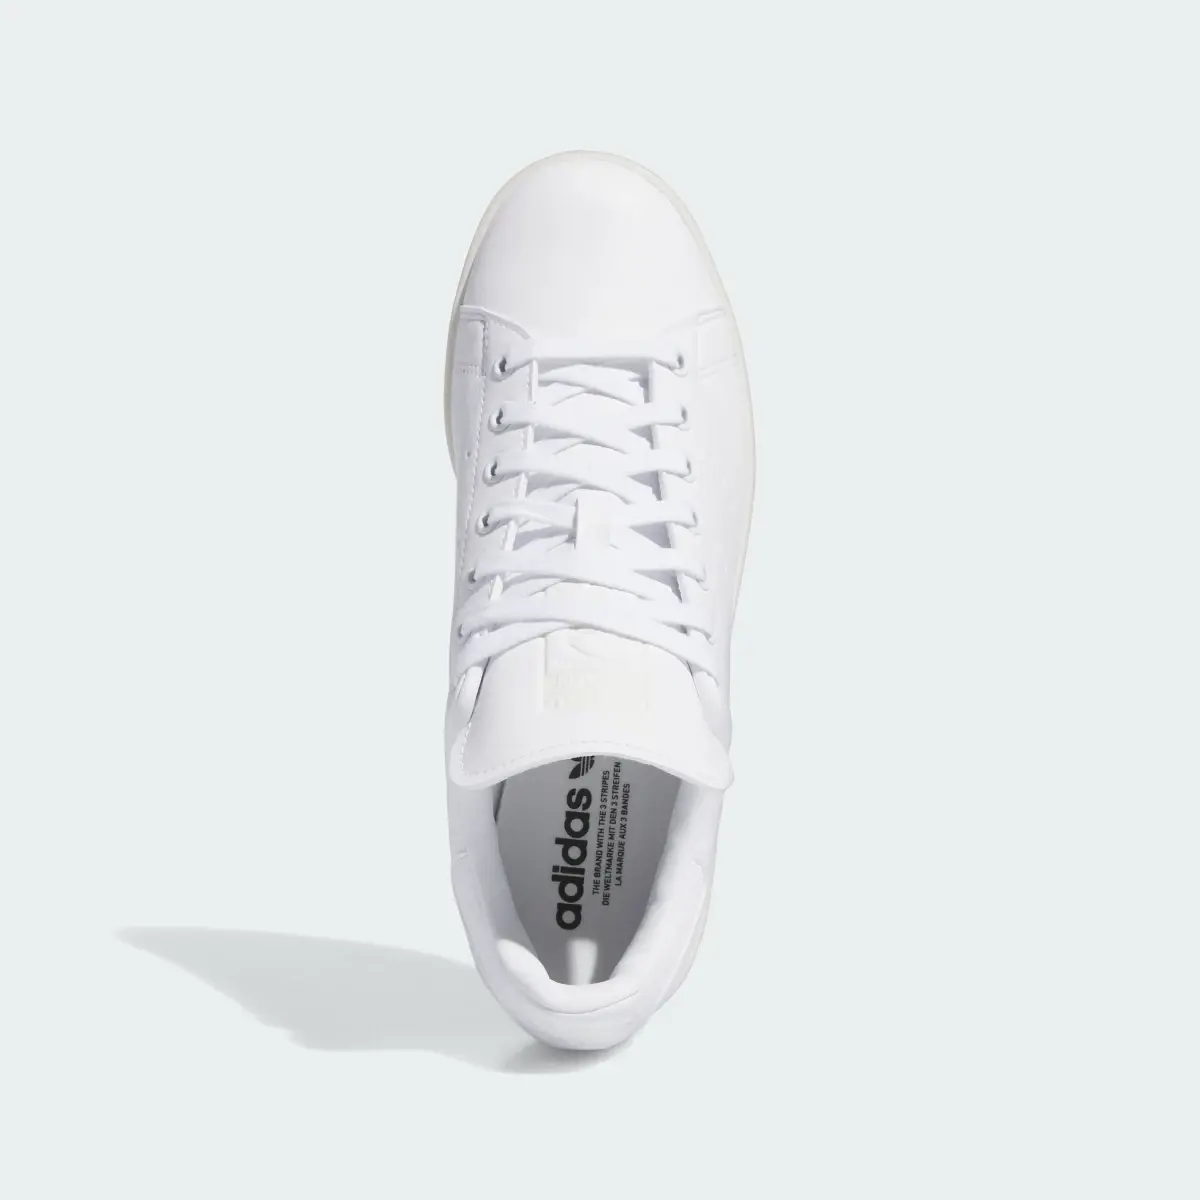 Adidas Stan Smith Golf Shoes. 3